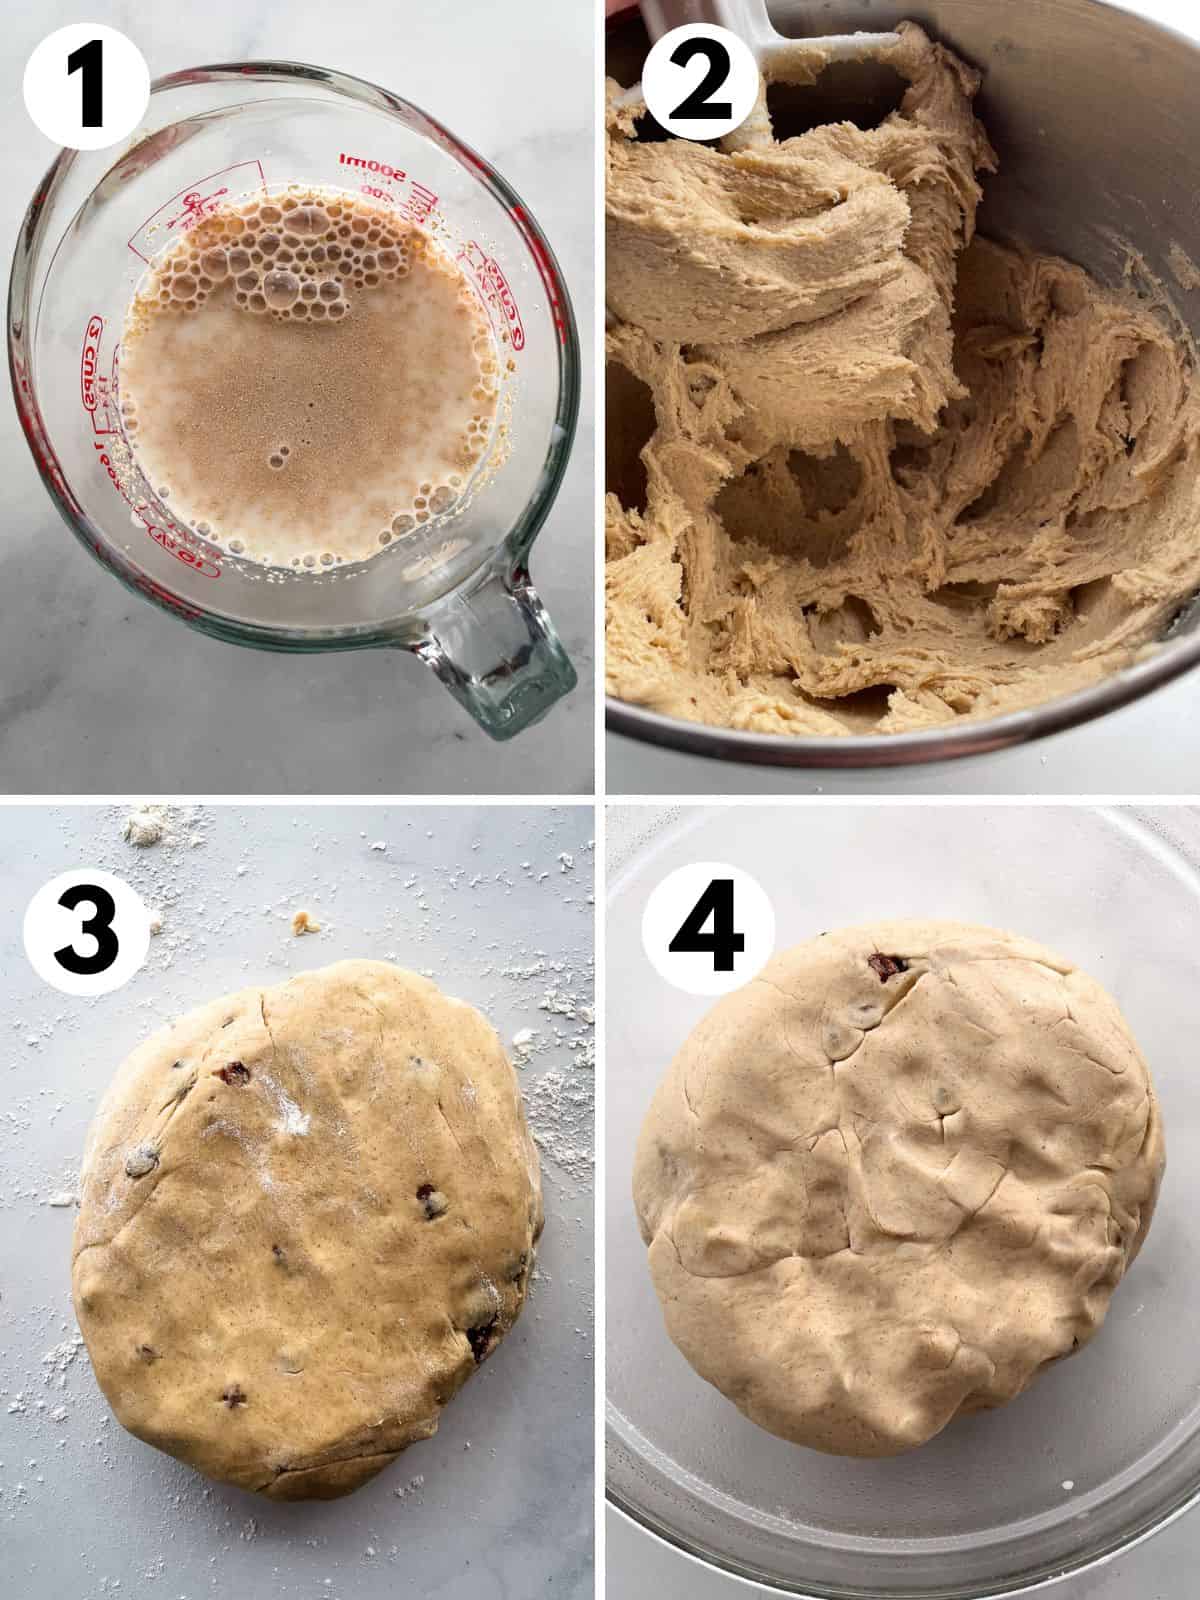 Steps for making gluten-free hot cross bun dough. 1. Yeast and warm milk bubbling. 2. Dough in a mixing bowl. 3. Dough kneaded on the counter. 4. Dough risen in the bowl.